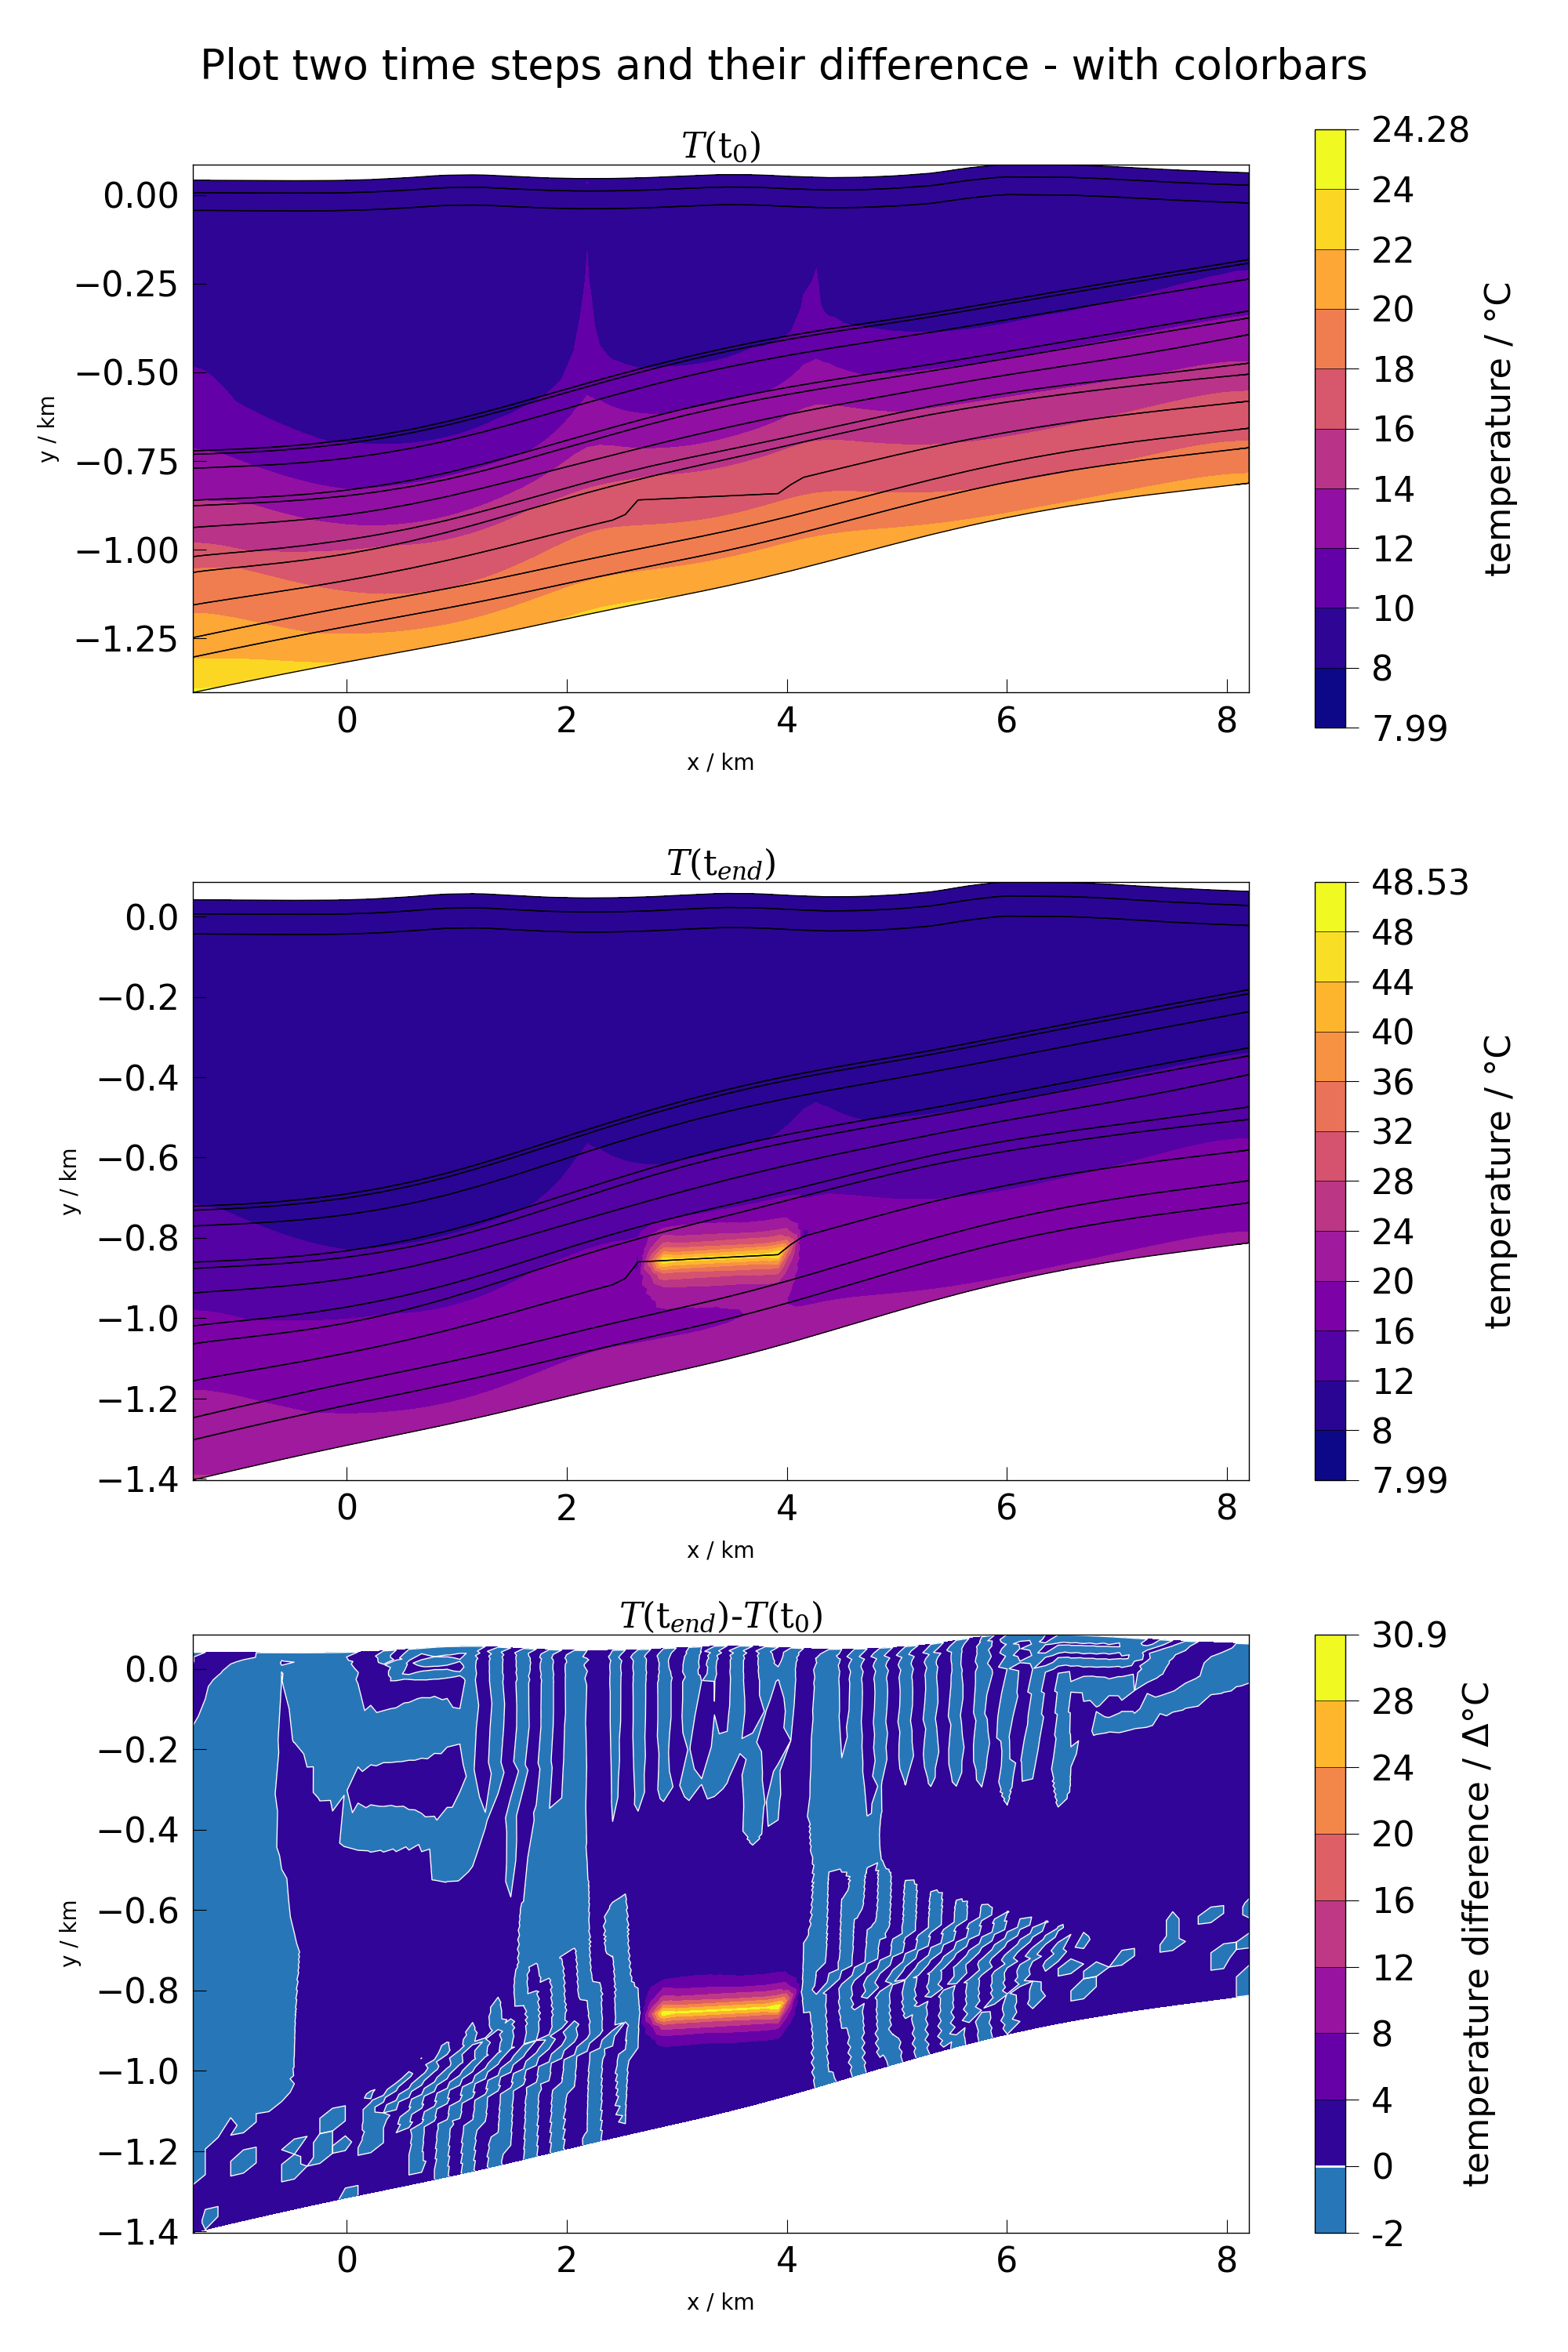 Plot two time steps and their difference - with colorbars, $T(\mathrm{t}_{0})$, $T(\mathrm{t}_{end})$, $T(\mathrm{t}_{end})$-$T(\mathrm{t}_{0})$